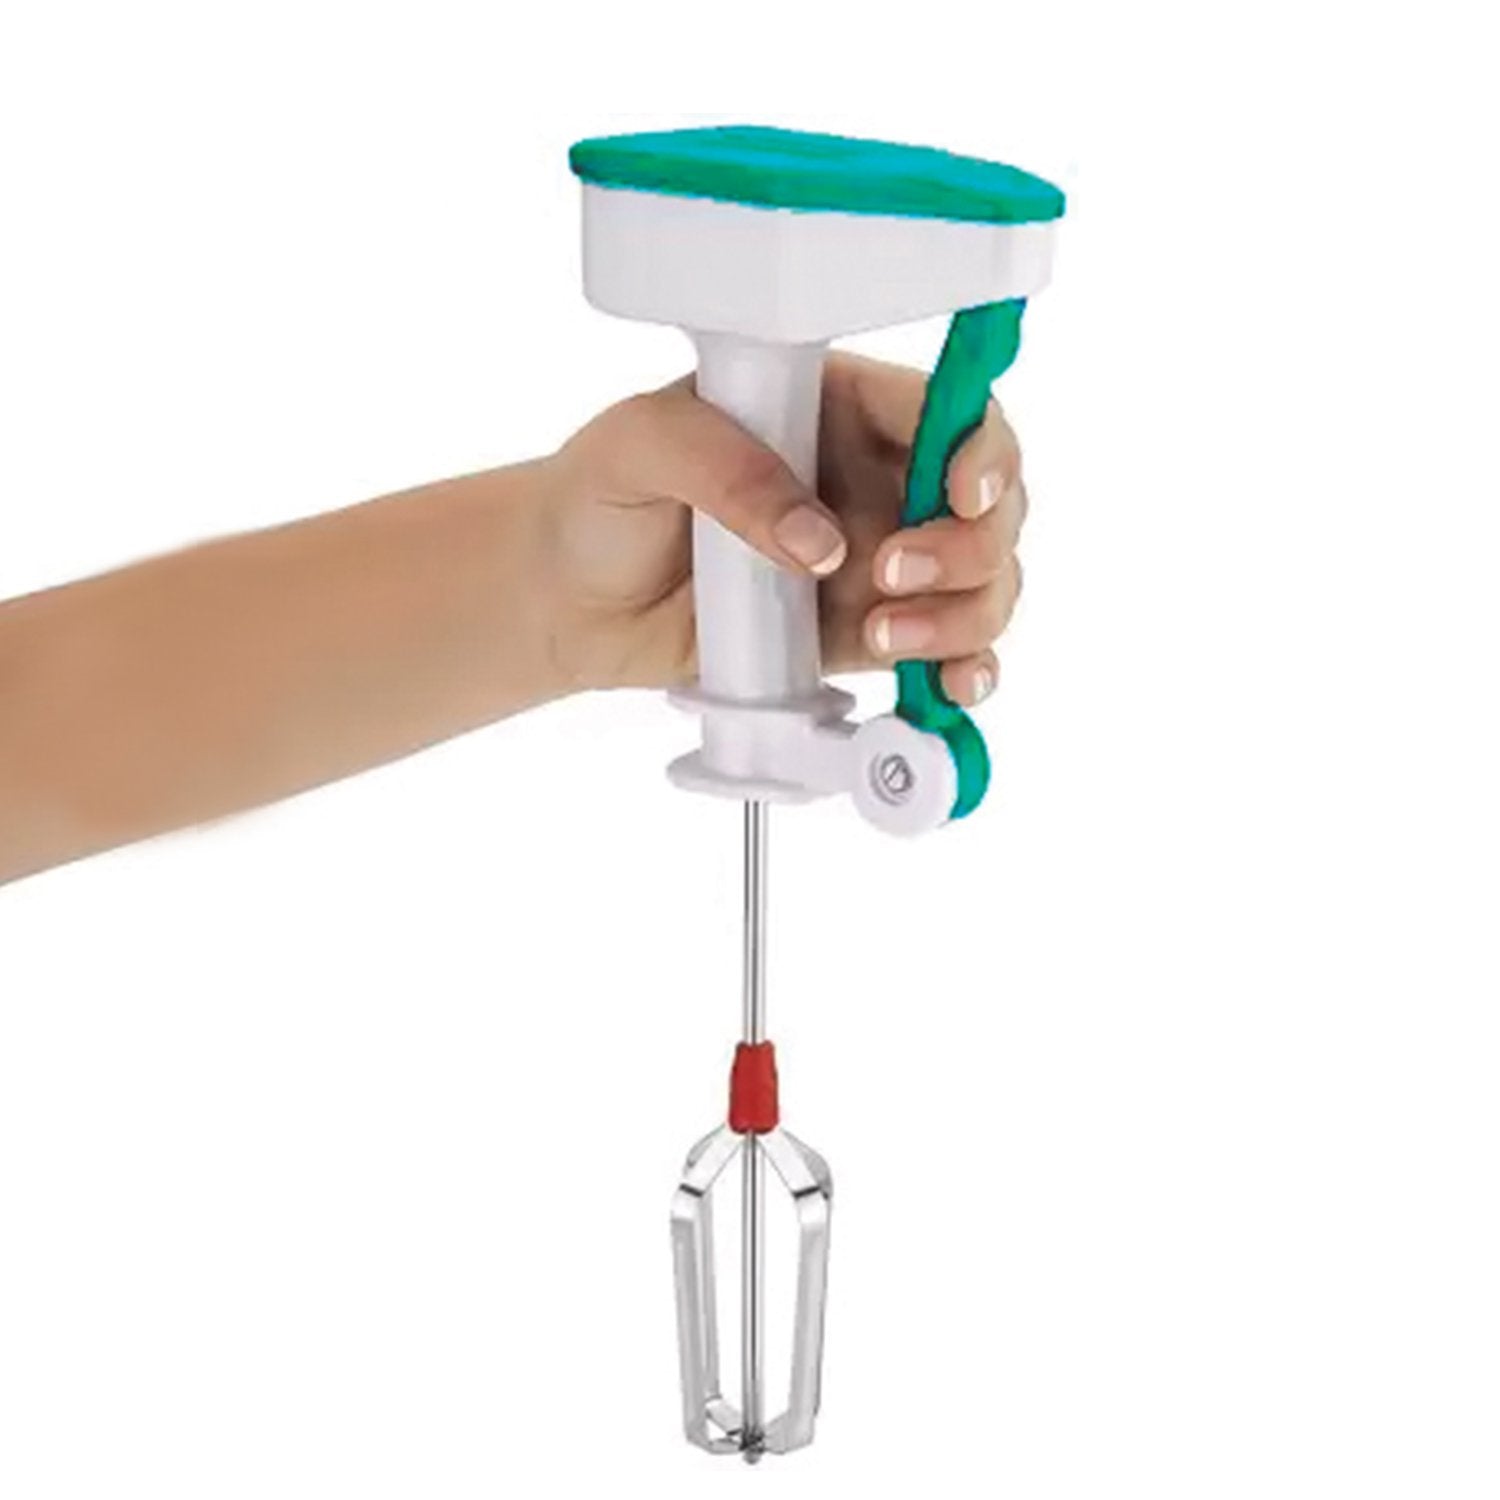 0723 Power-Free Manual Hand Blender With Stainless Steel Blades - SkyShopy